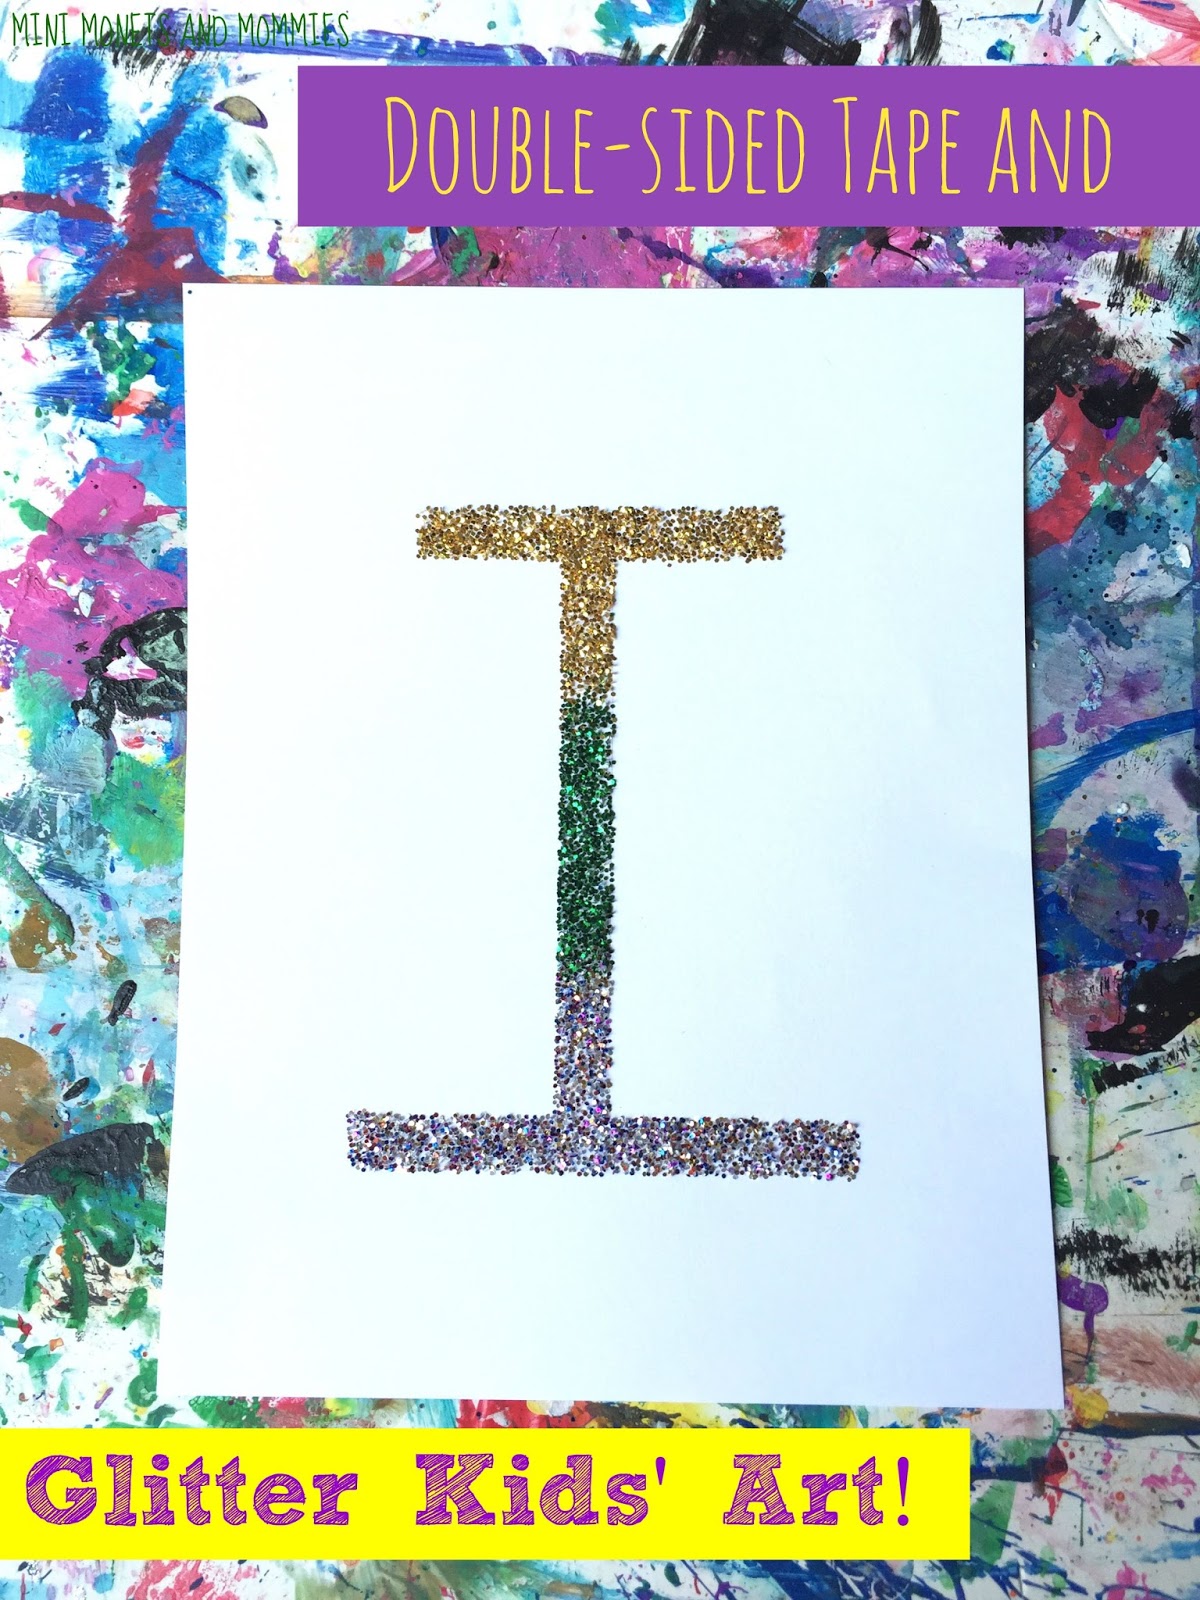 Mini Monets and Mommies: Double-Sided Tape and Glitter Art Activities for  Kids